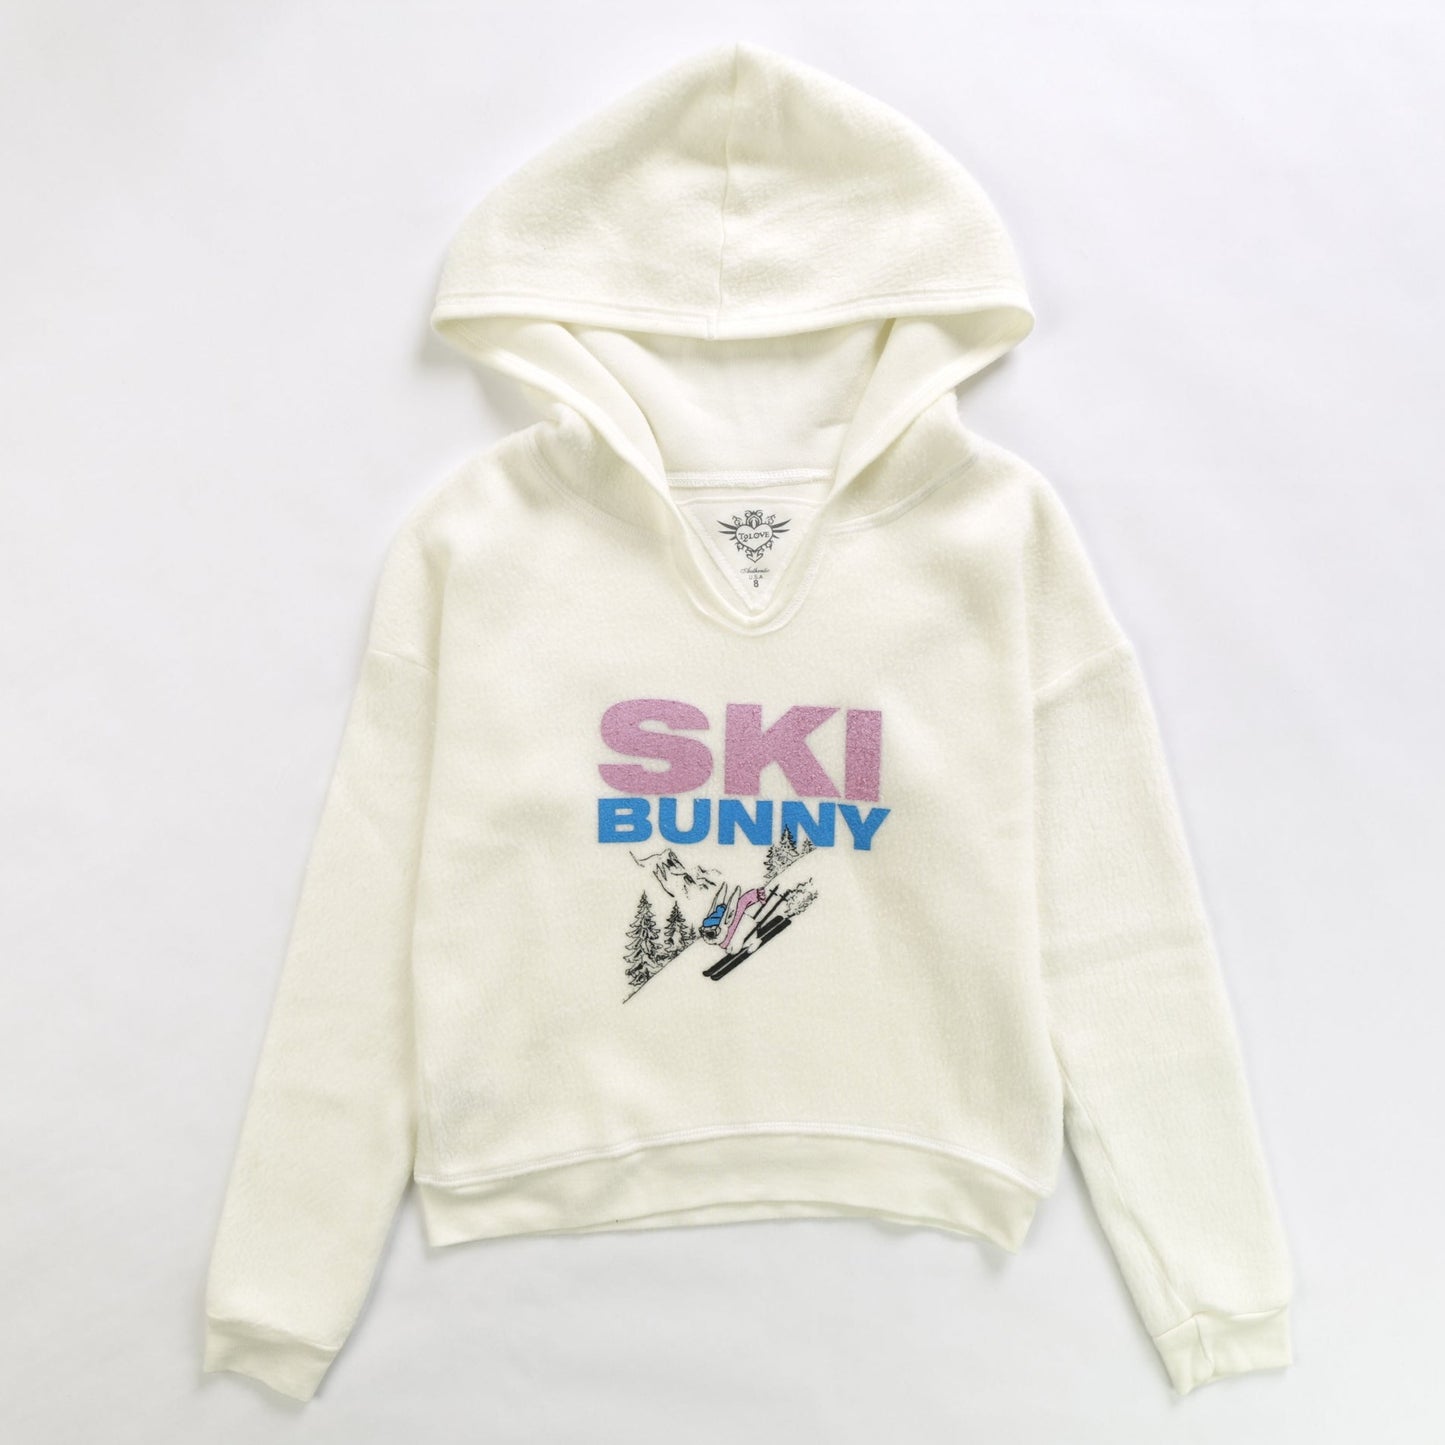 "SKI BUNNY" Hooded Pullover & Slouch Pants Set